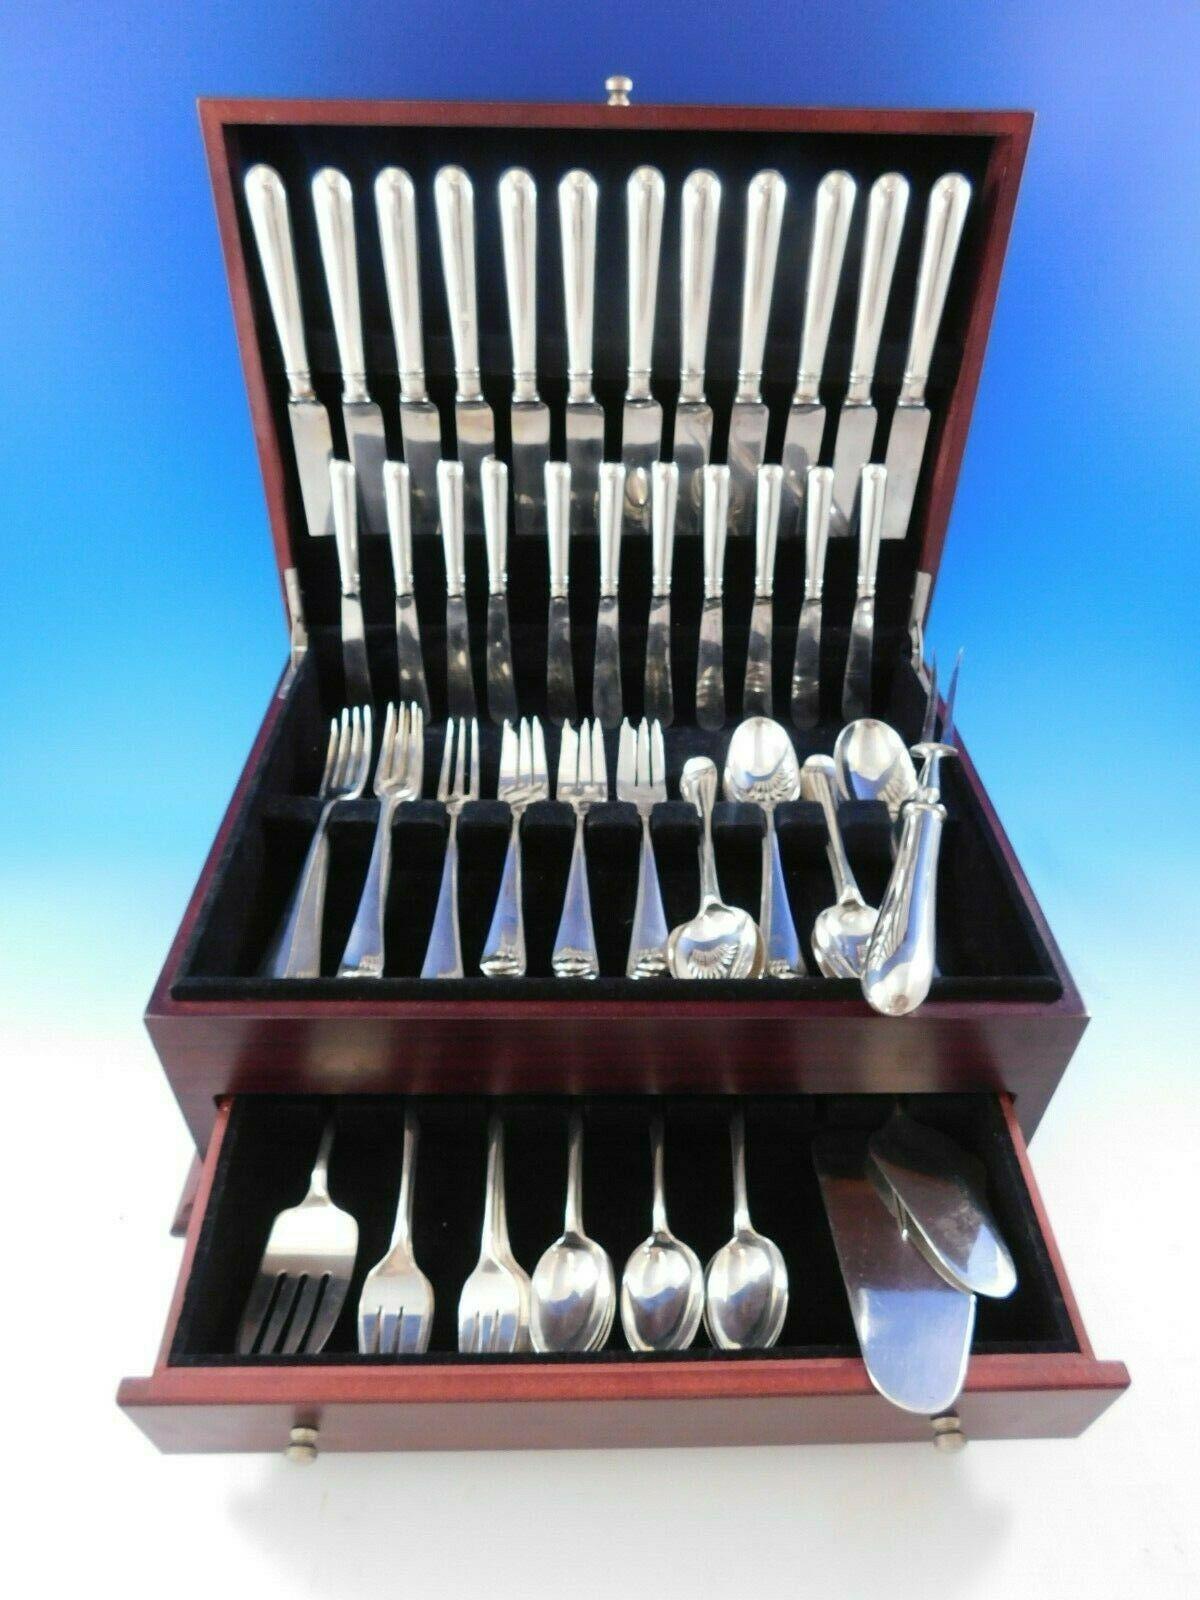 Timeless rat tail by Spaulding Co. (ENGLAND) sterling silver flatware set - 89 pieces. This set includes:

12 dinner knives, 9 3/4